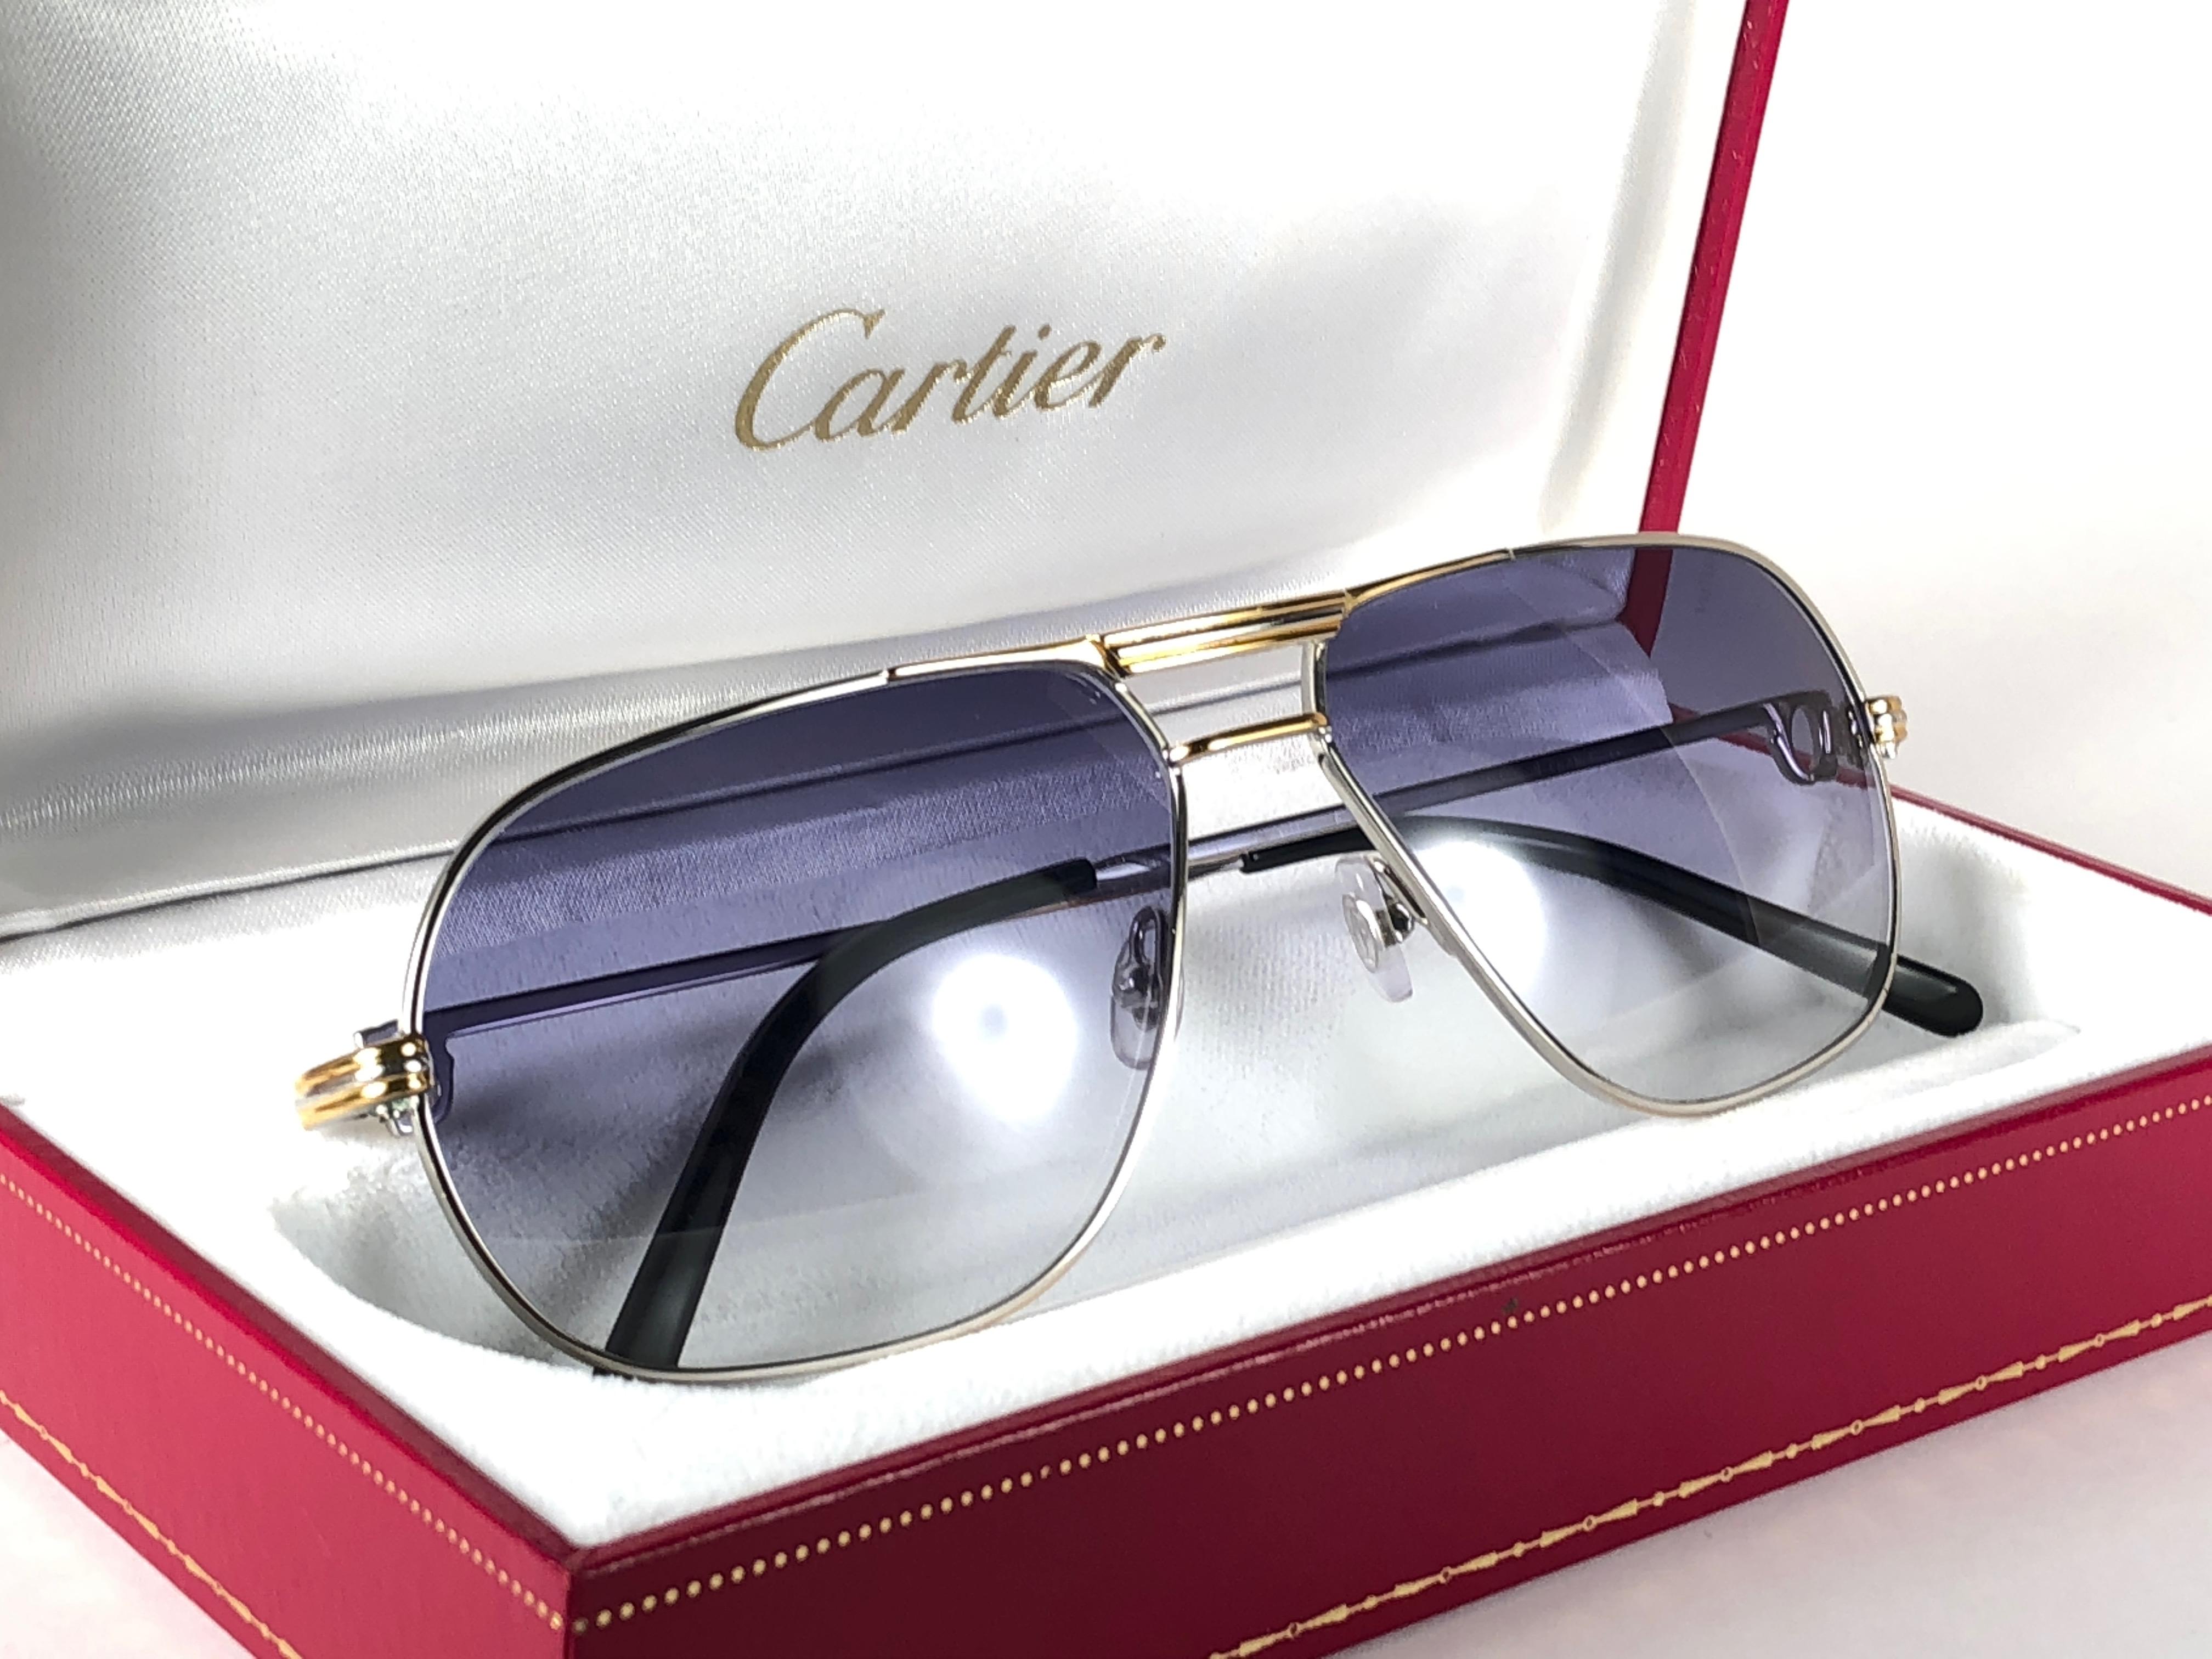 Mint 1988 Cartier Aviator Tank Platinum sunglasses with blue gradient (uv protection)lenses. 
Frame is with the front and sides in yellow and white gold. All hallmarks. Cartier gold signs on the ear paddles. Both arms sport the C from Cartier on the